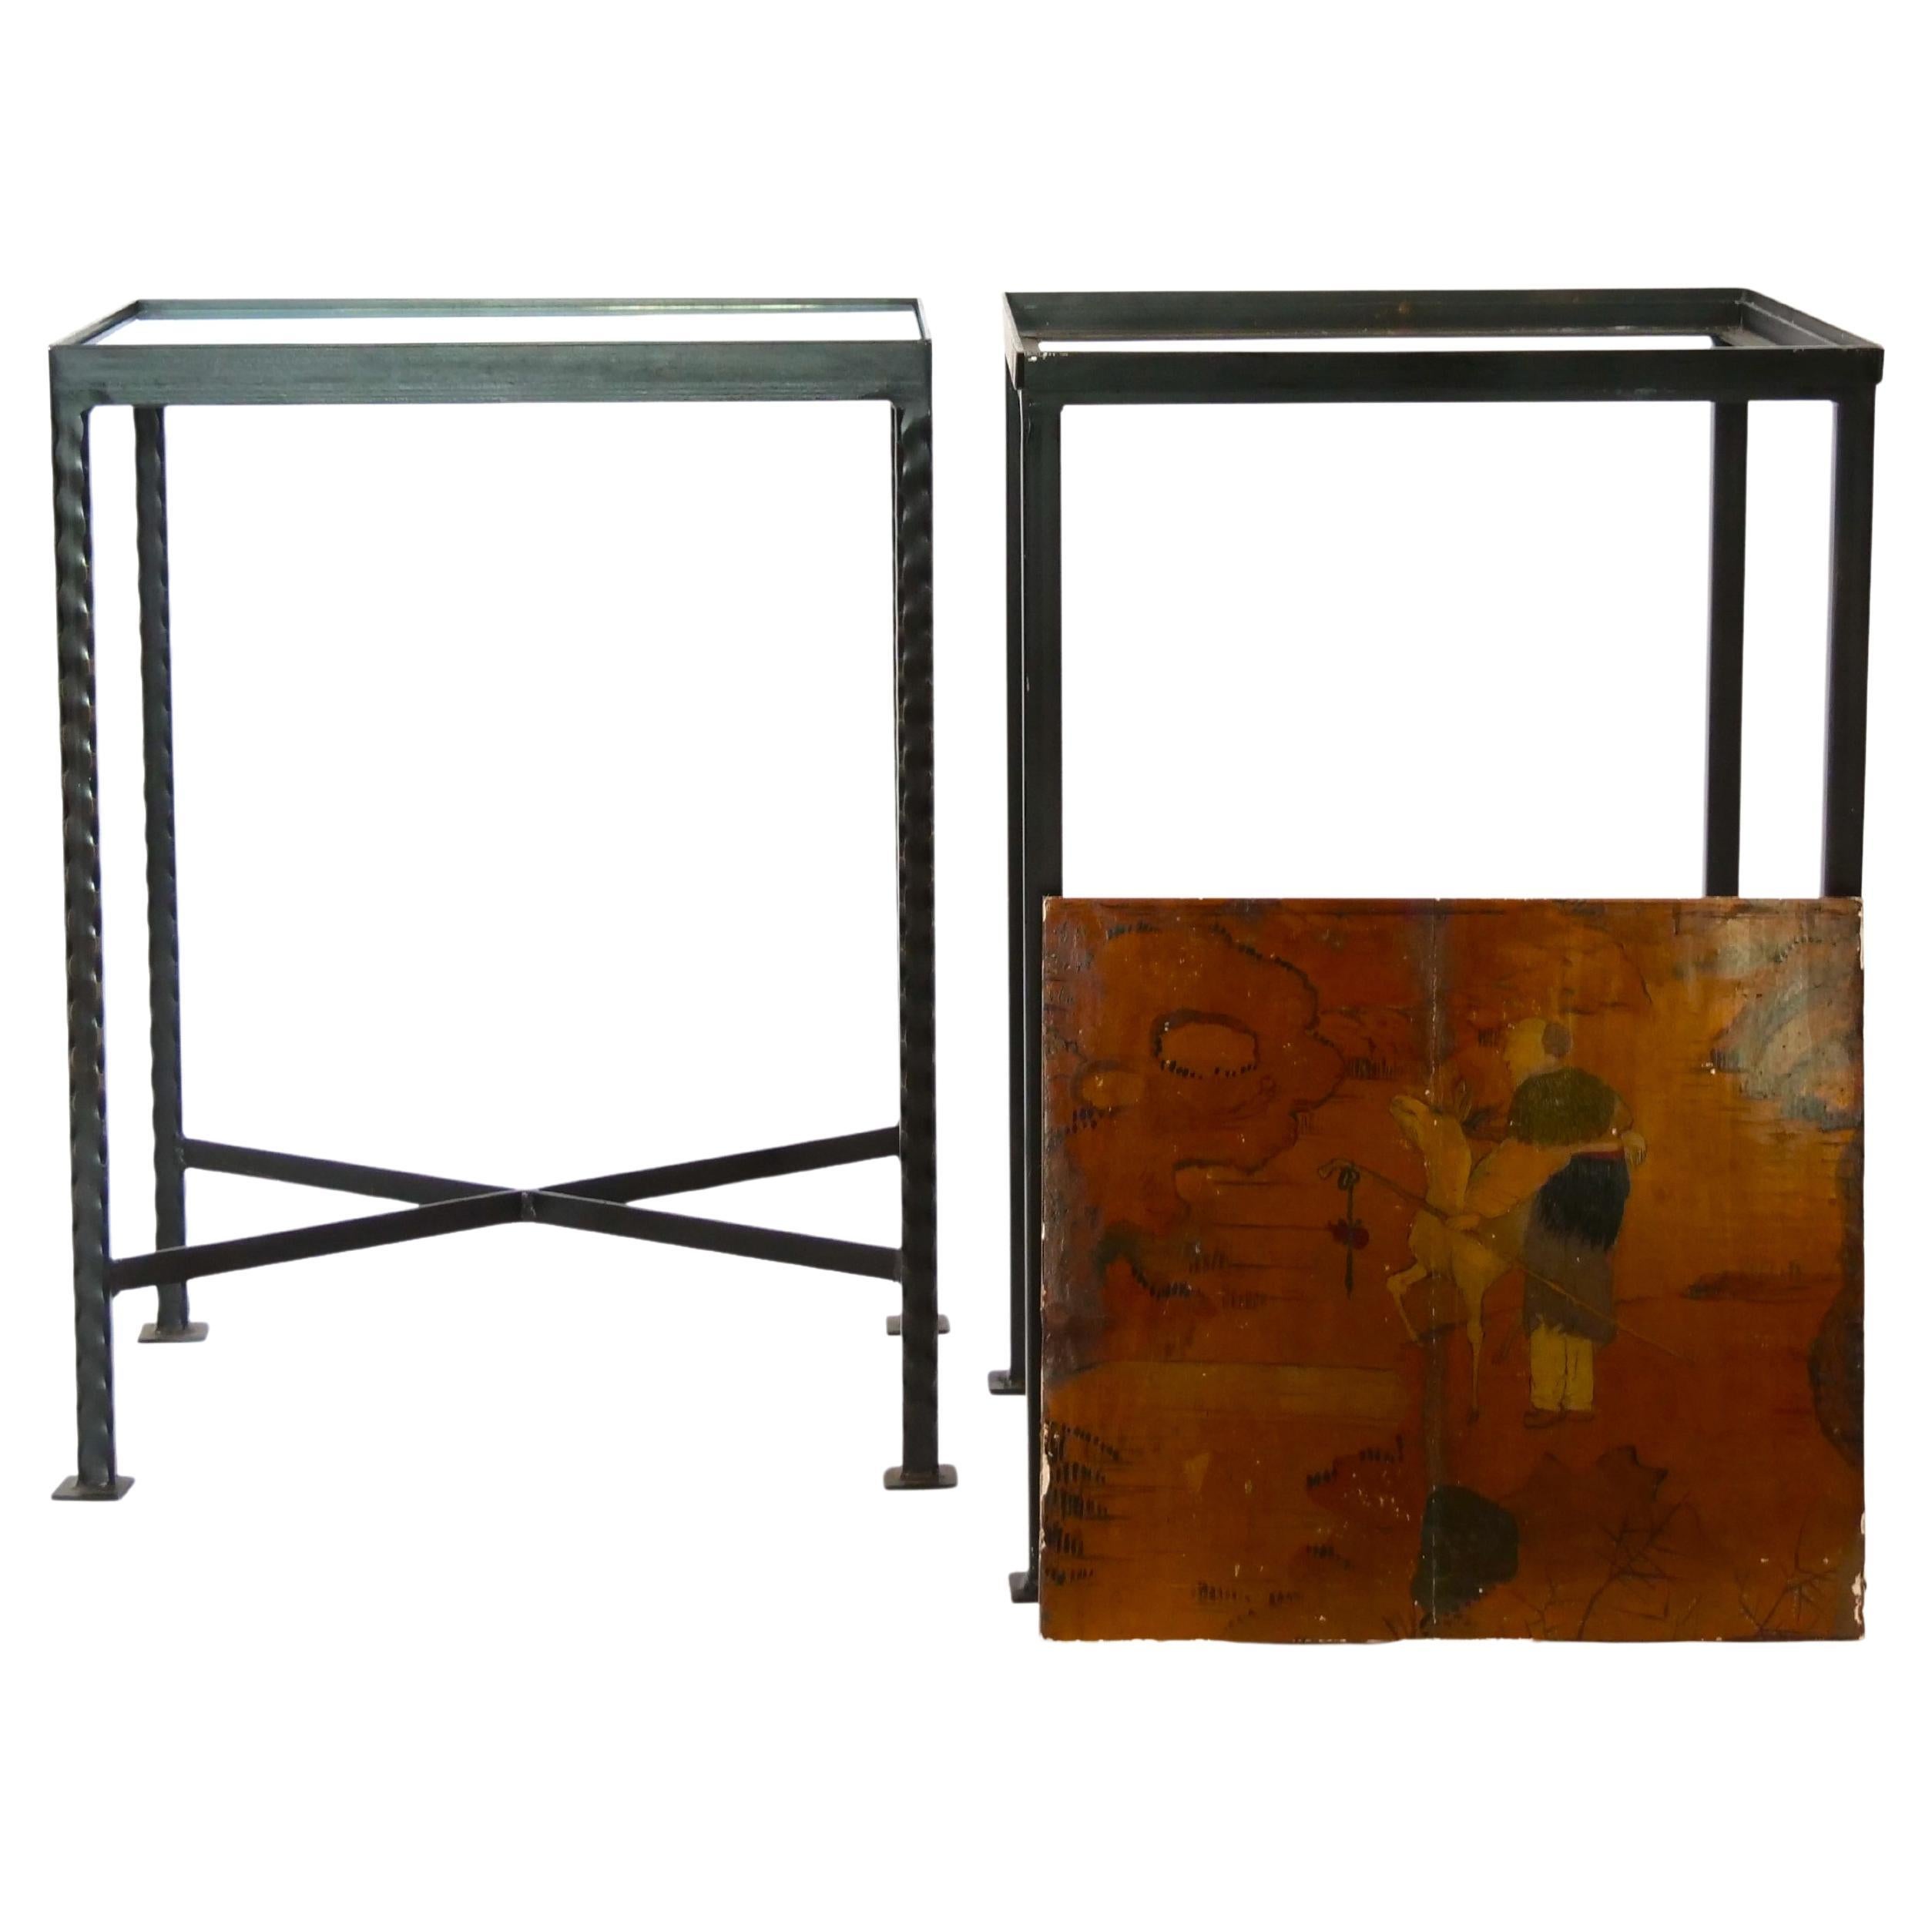 Late 20th century pair black wrought iron framed with hand painted wood top side table. Each table features a removable hand painted wood top design details resting on a squared frame wrought iron metal base. Each table is in good condition with